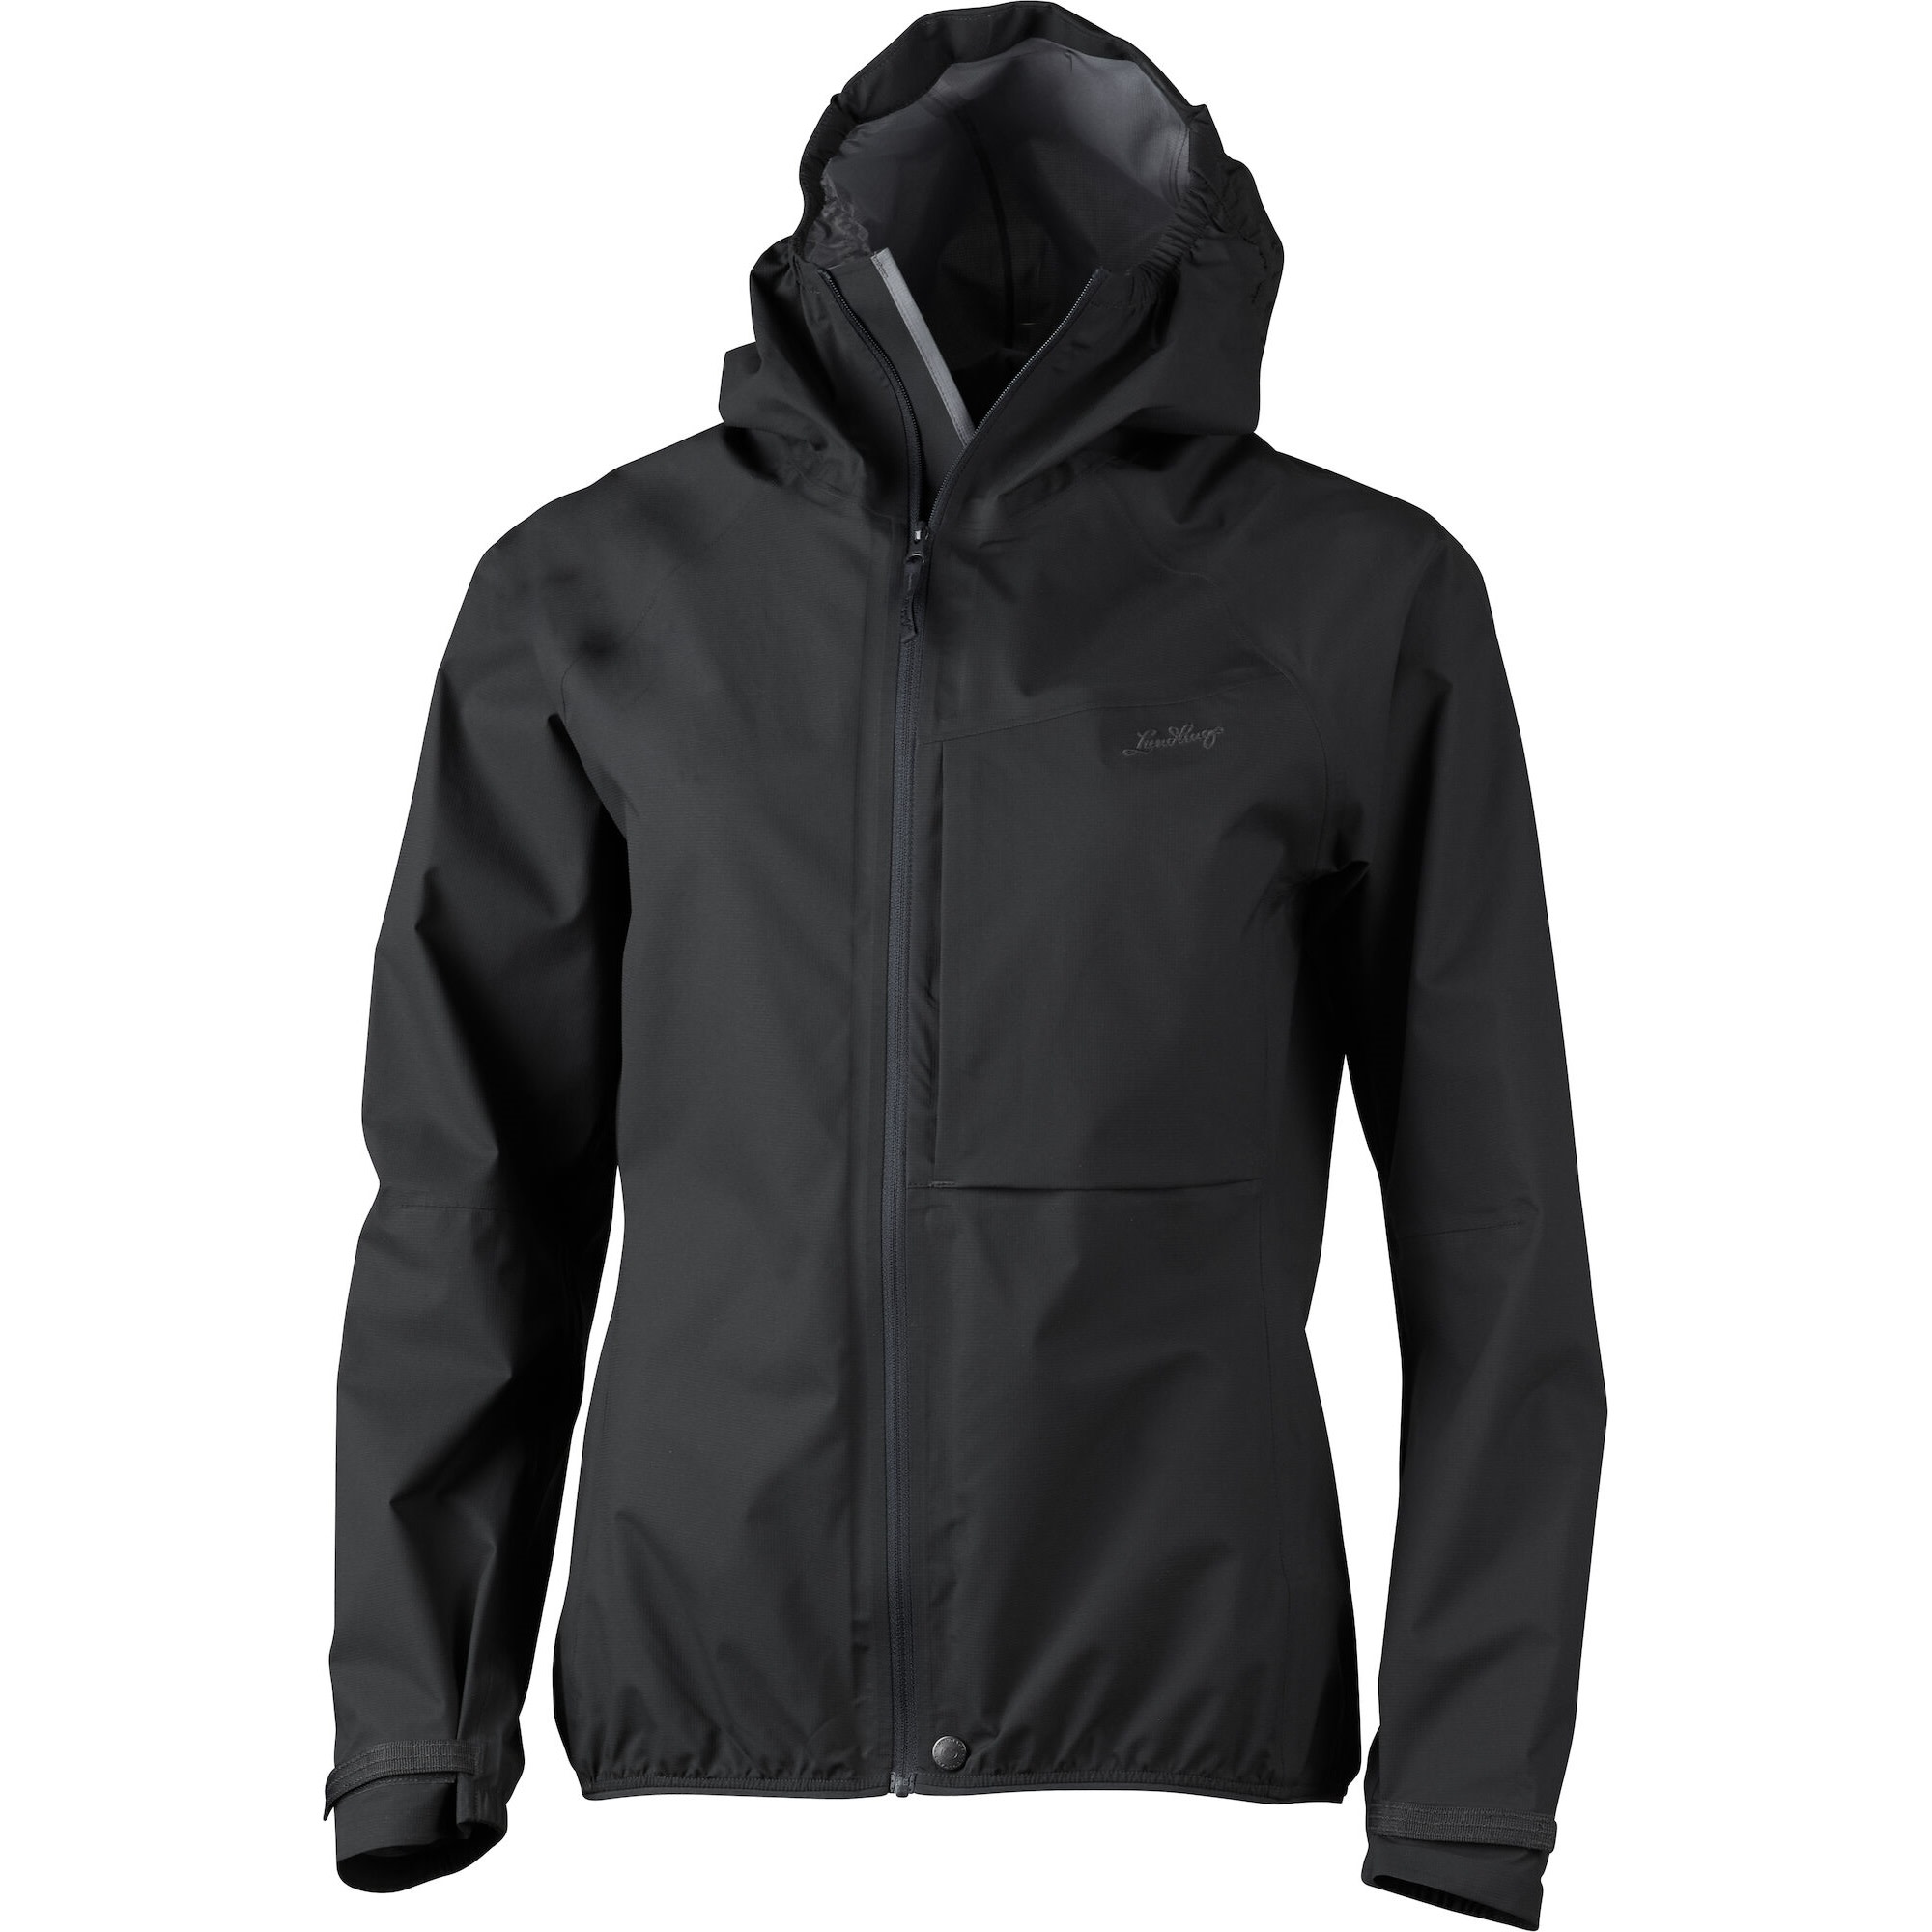 Lundhags Women’s Lo Jacket Charcoal